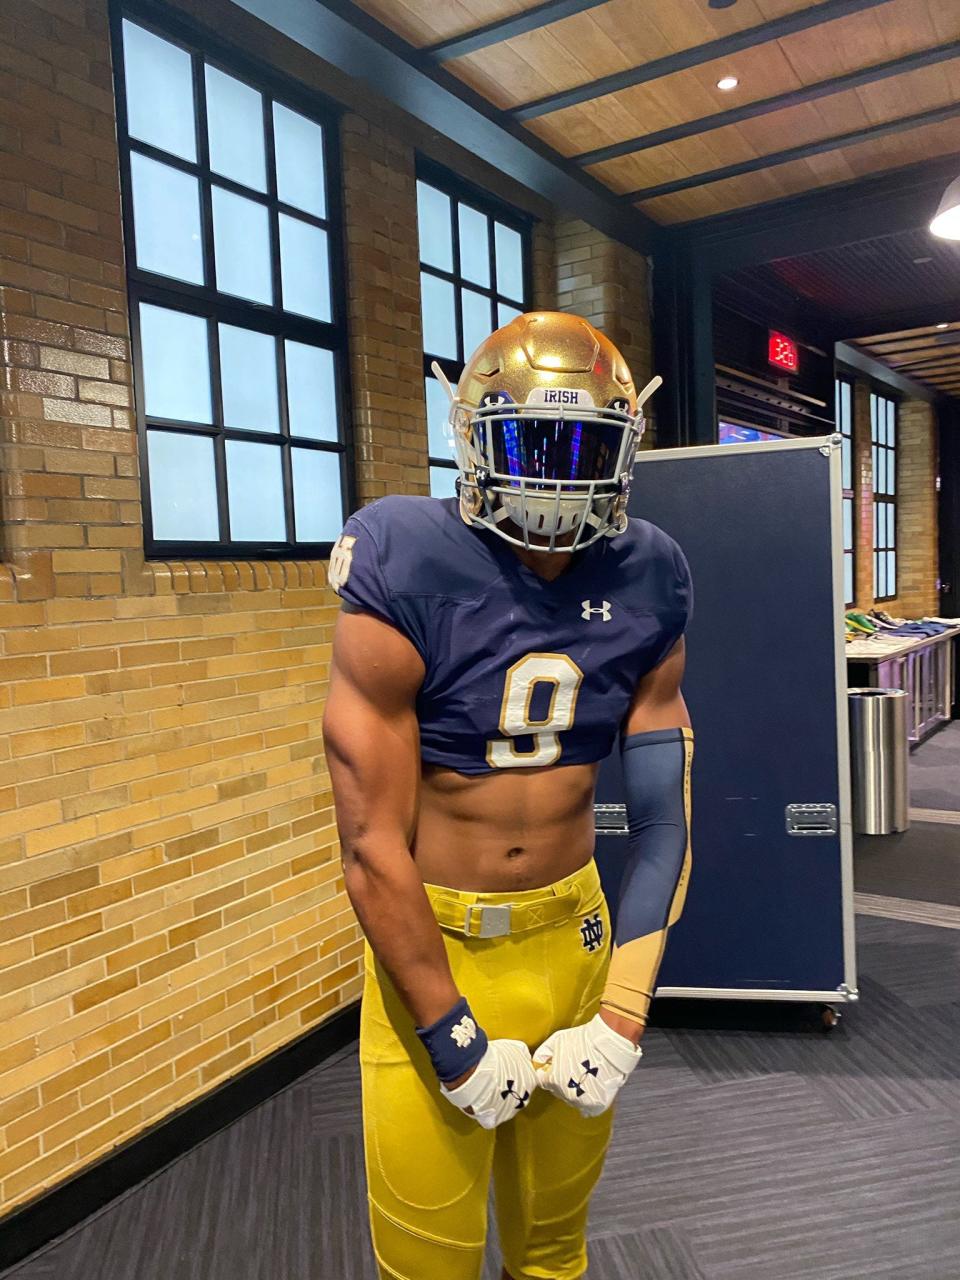 Defensive end Keon Keeley, a 2023 recruit, poses on an unofficial visit to Notre Dame in June 2021.